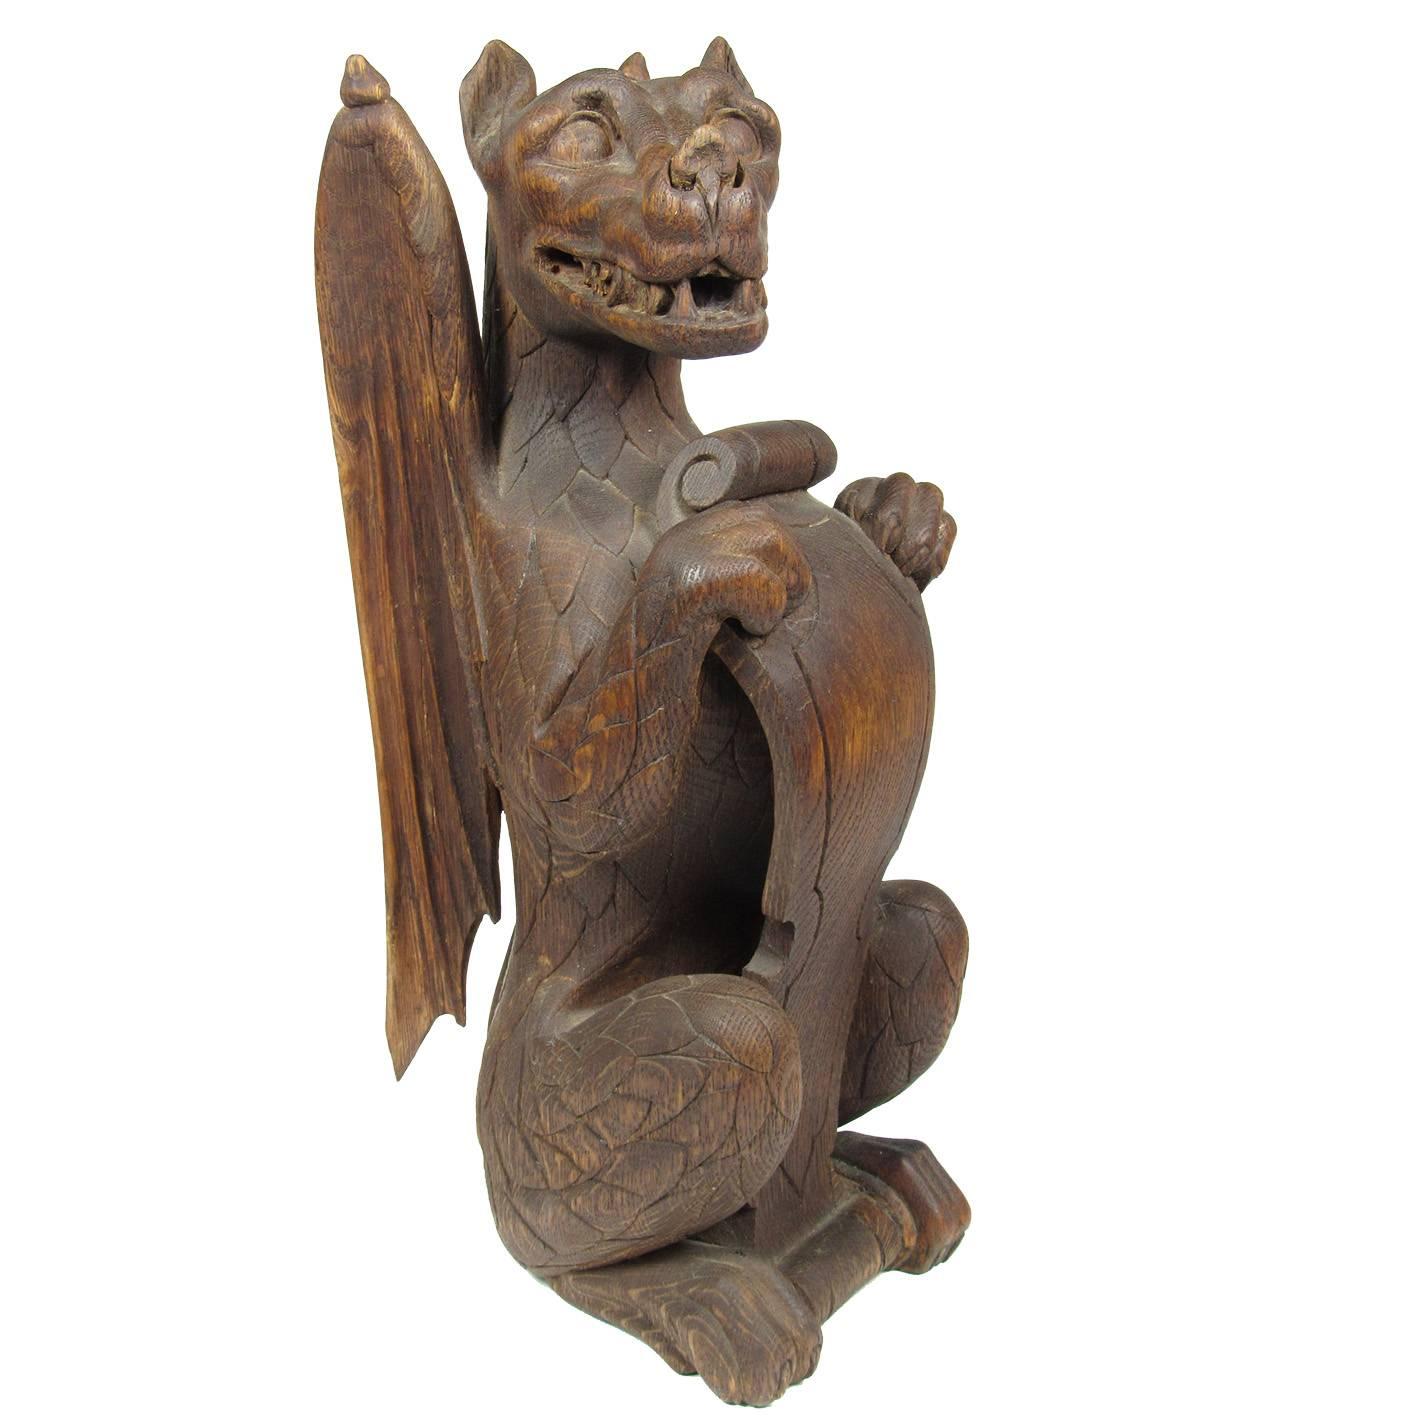 Rare 19th Century Carved Wood Figure of a Dragon Holding a Shield For Sale